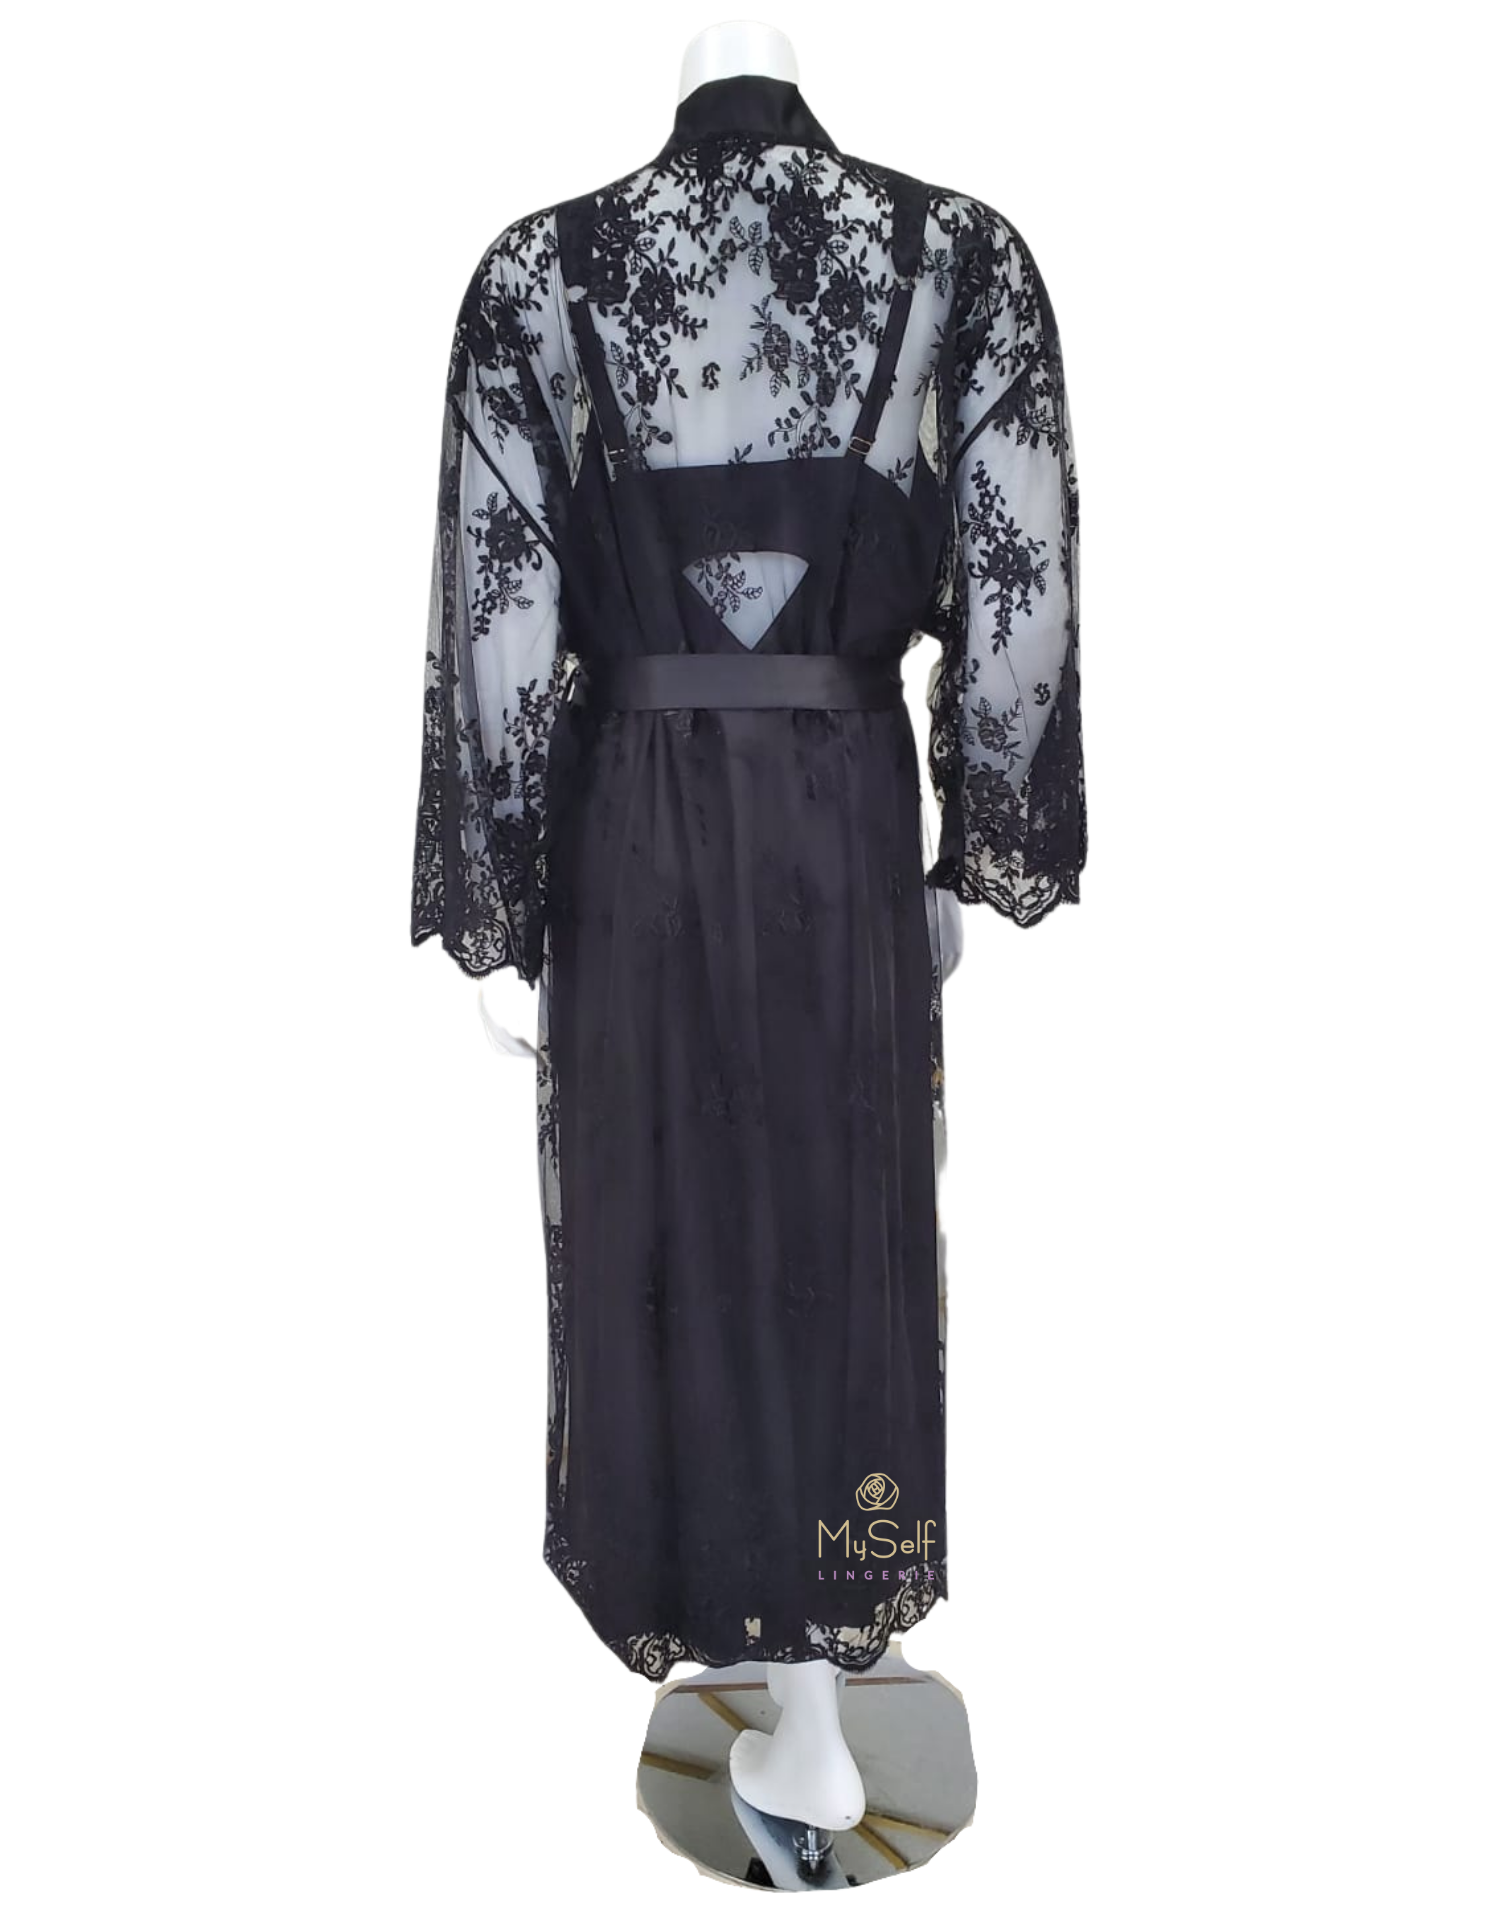 Rya Collection 220X Black Darling Embroidered Lace Robe Plus Sizes myselflingerie.com